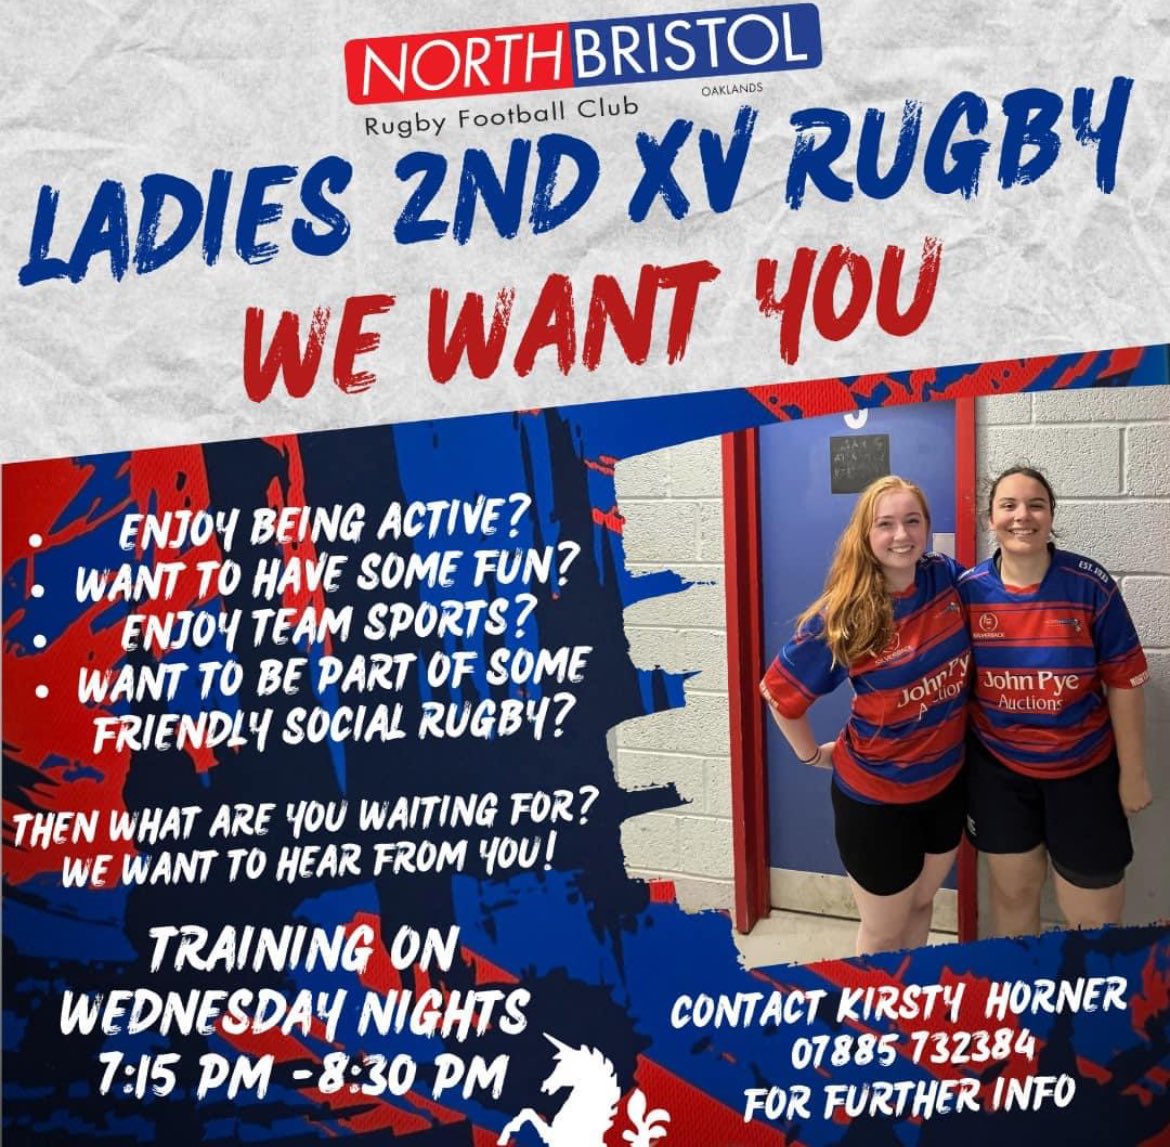 @BSDistrictRugby come and join #championship #winners #northbristolrugby this #wednesday at North Bristol Rugby Club for #womensrugby #training session 7:15pm 24th #April #UTN